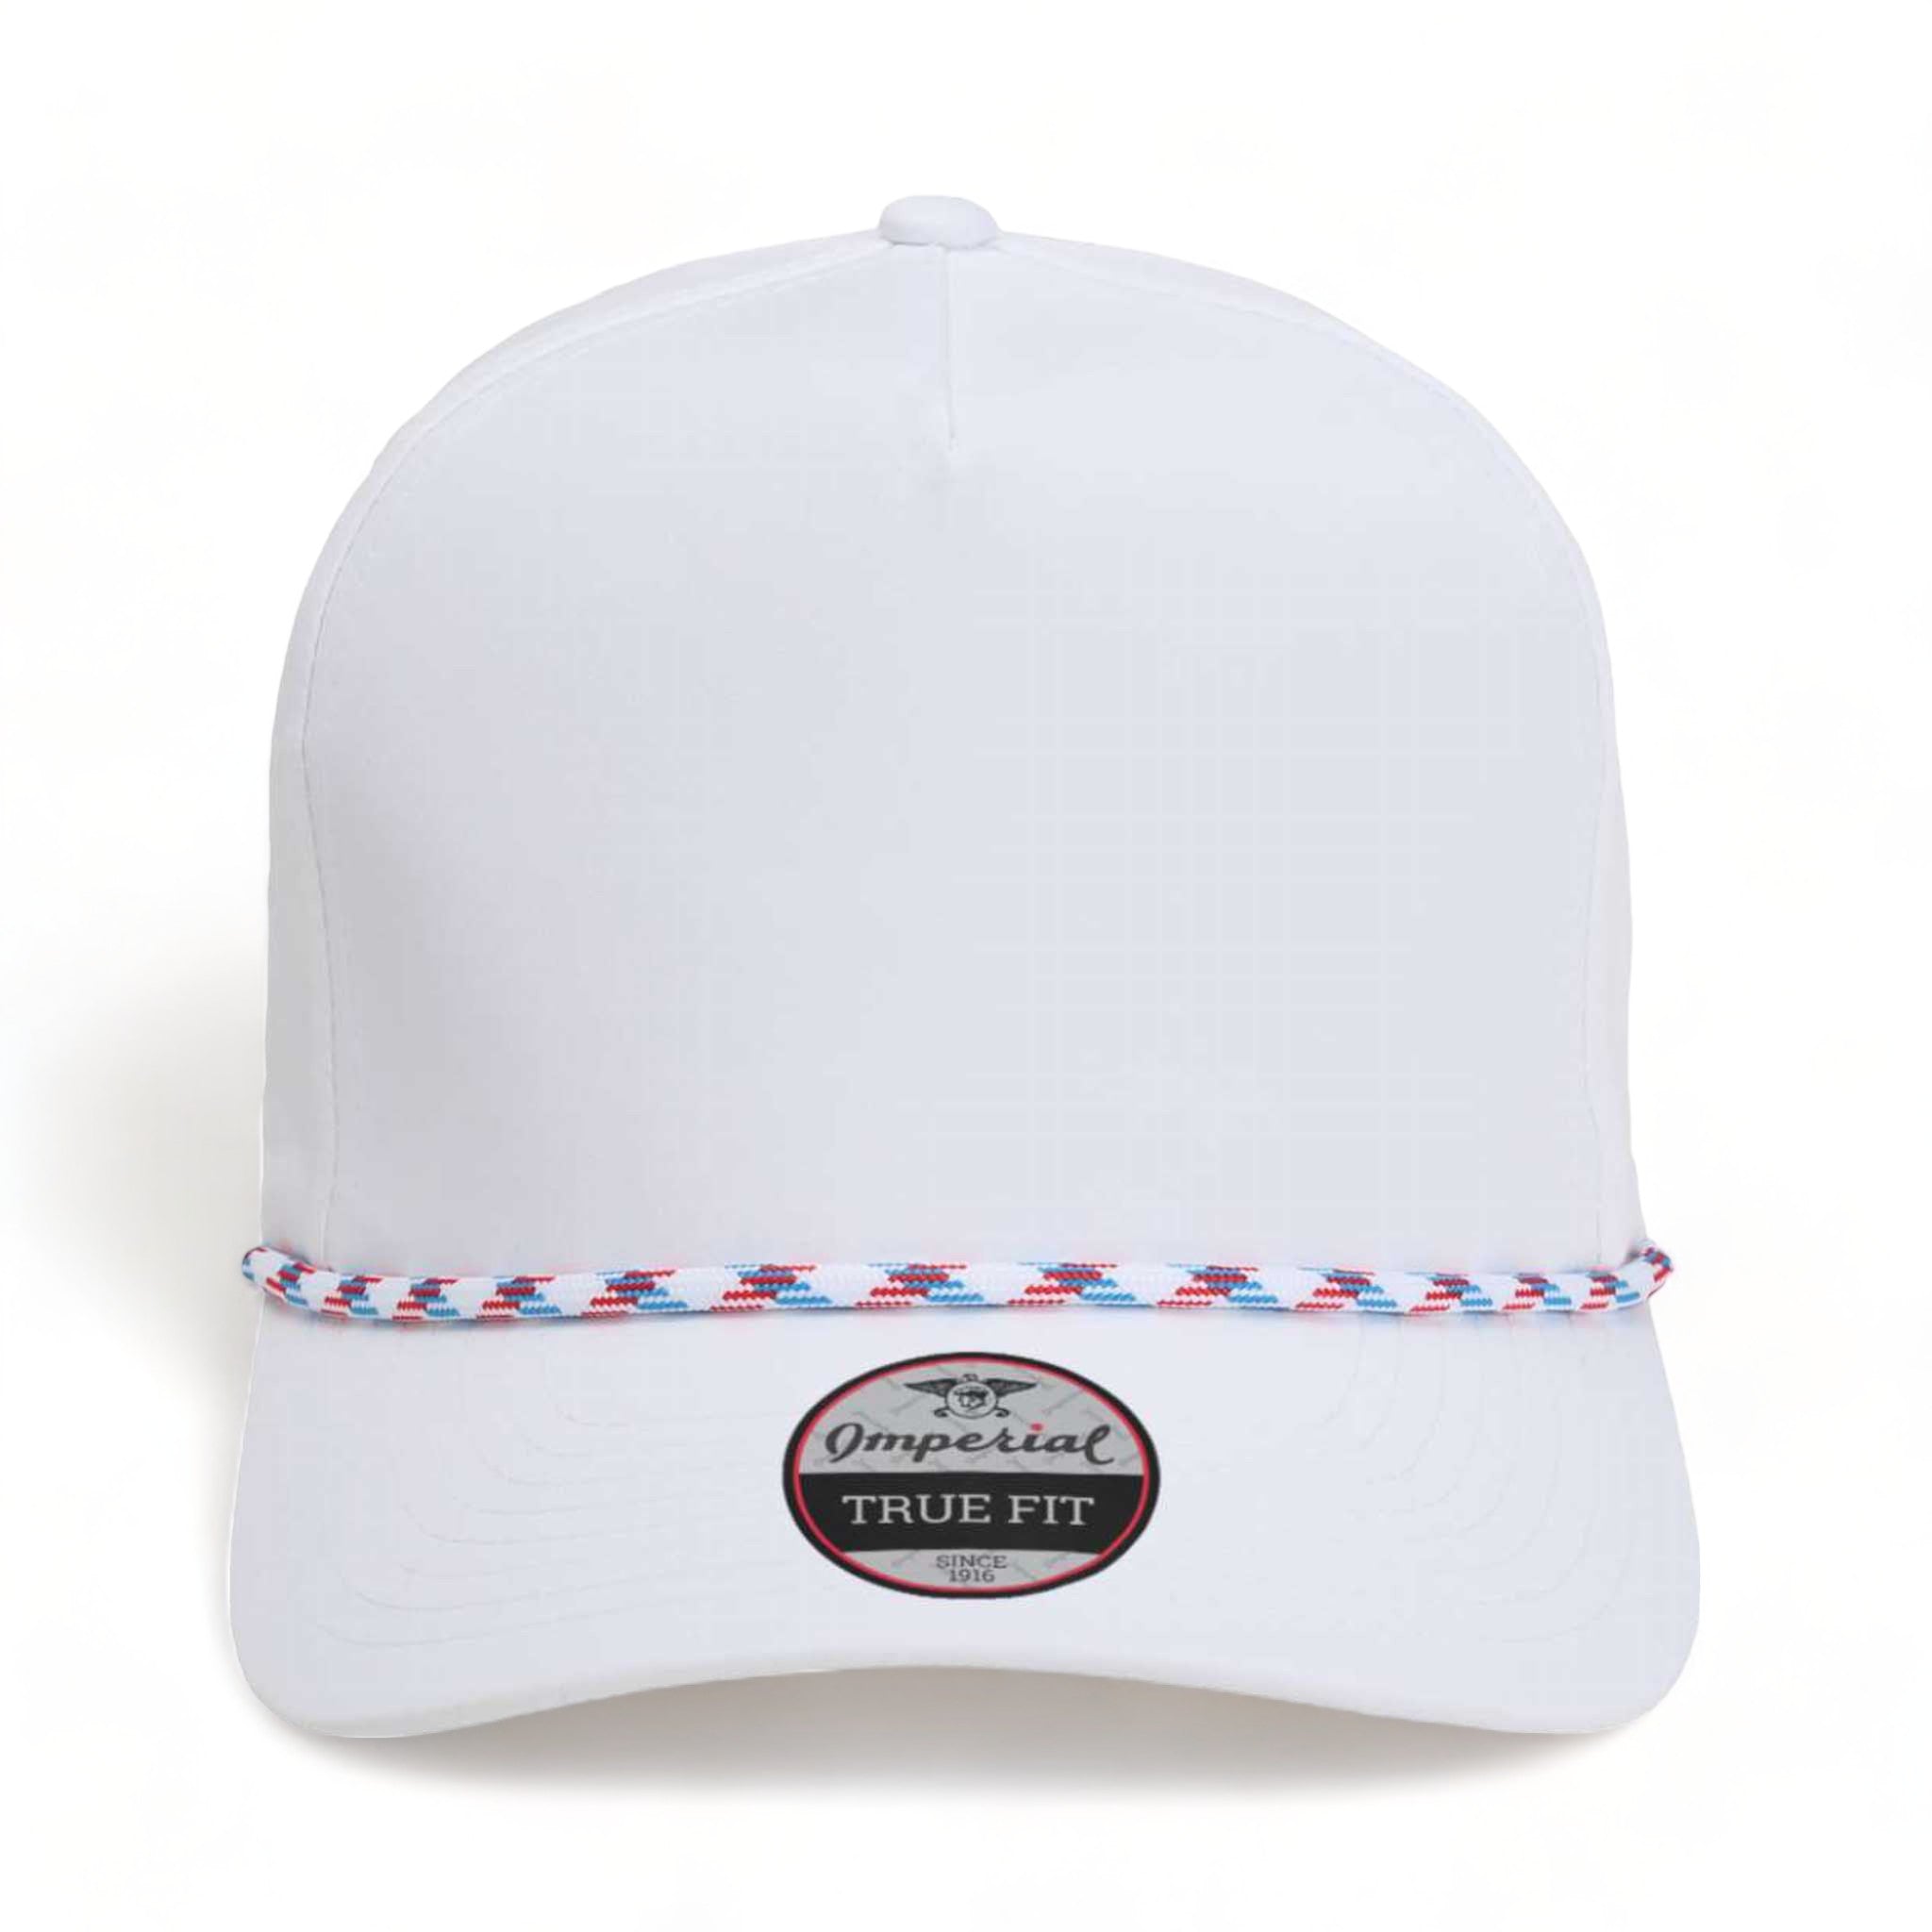 Front view of Imperial 5054 custom hat in white and light blue-red